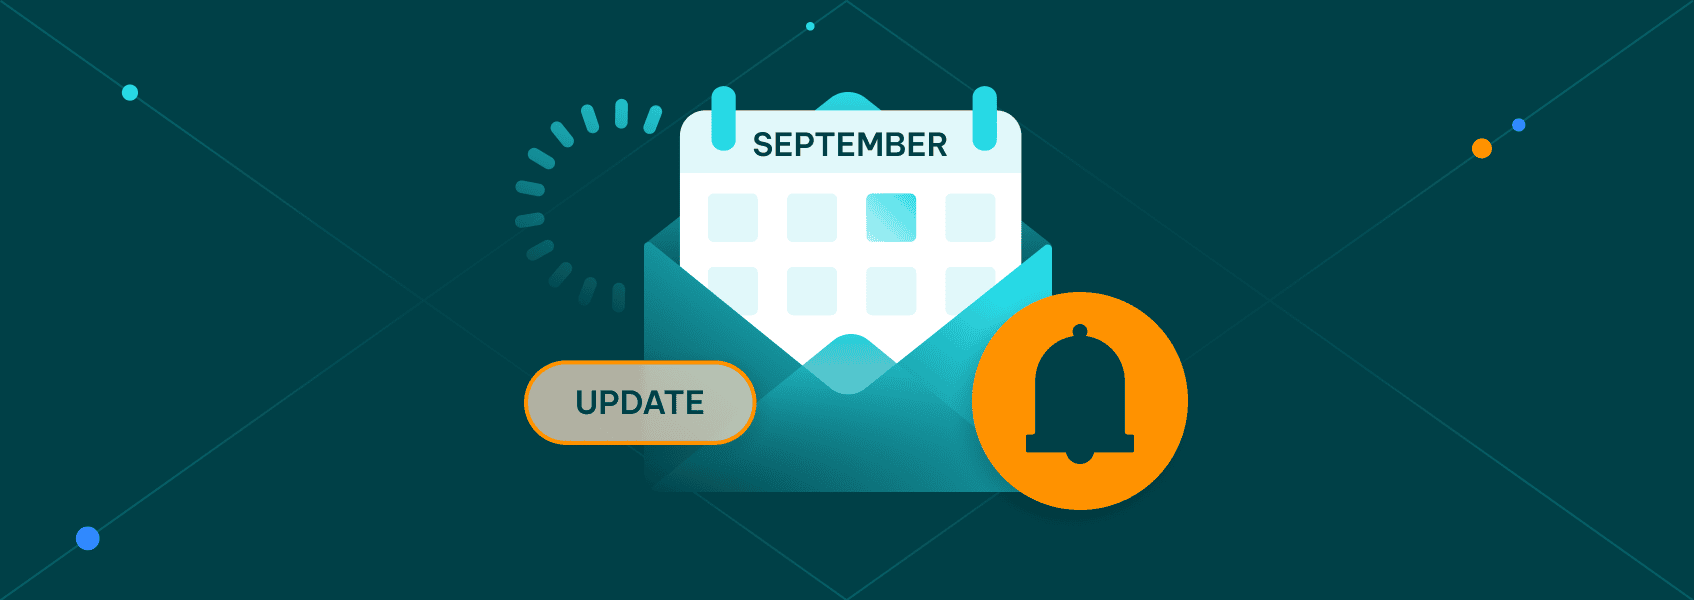 IPRoyal September Update: New Features, QOL Changes, and More!